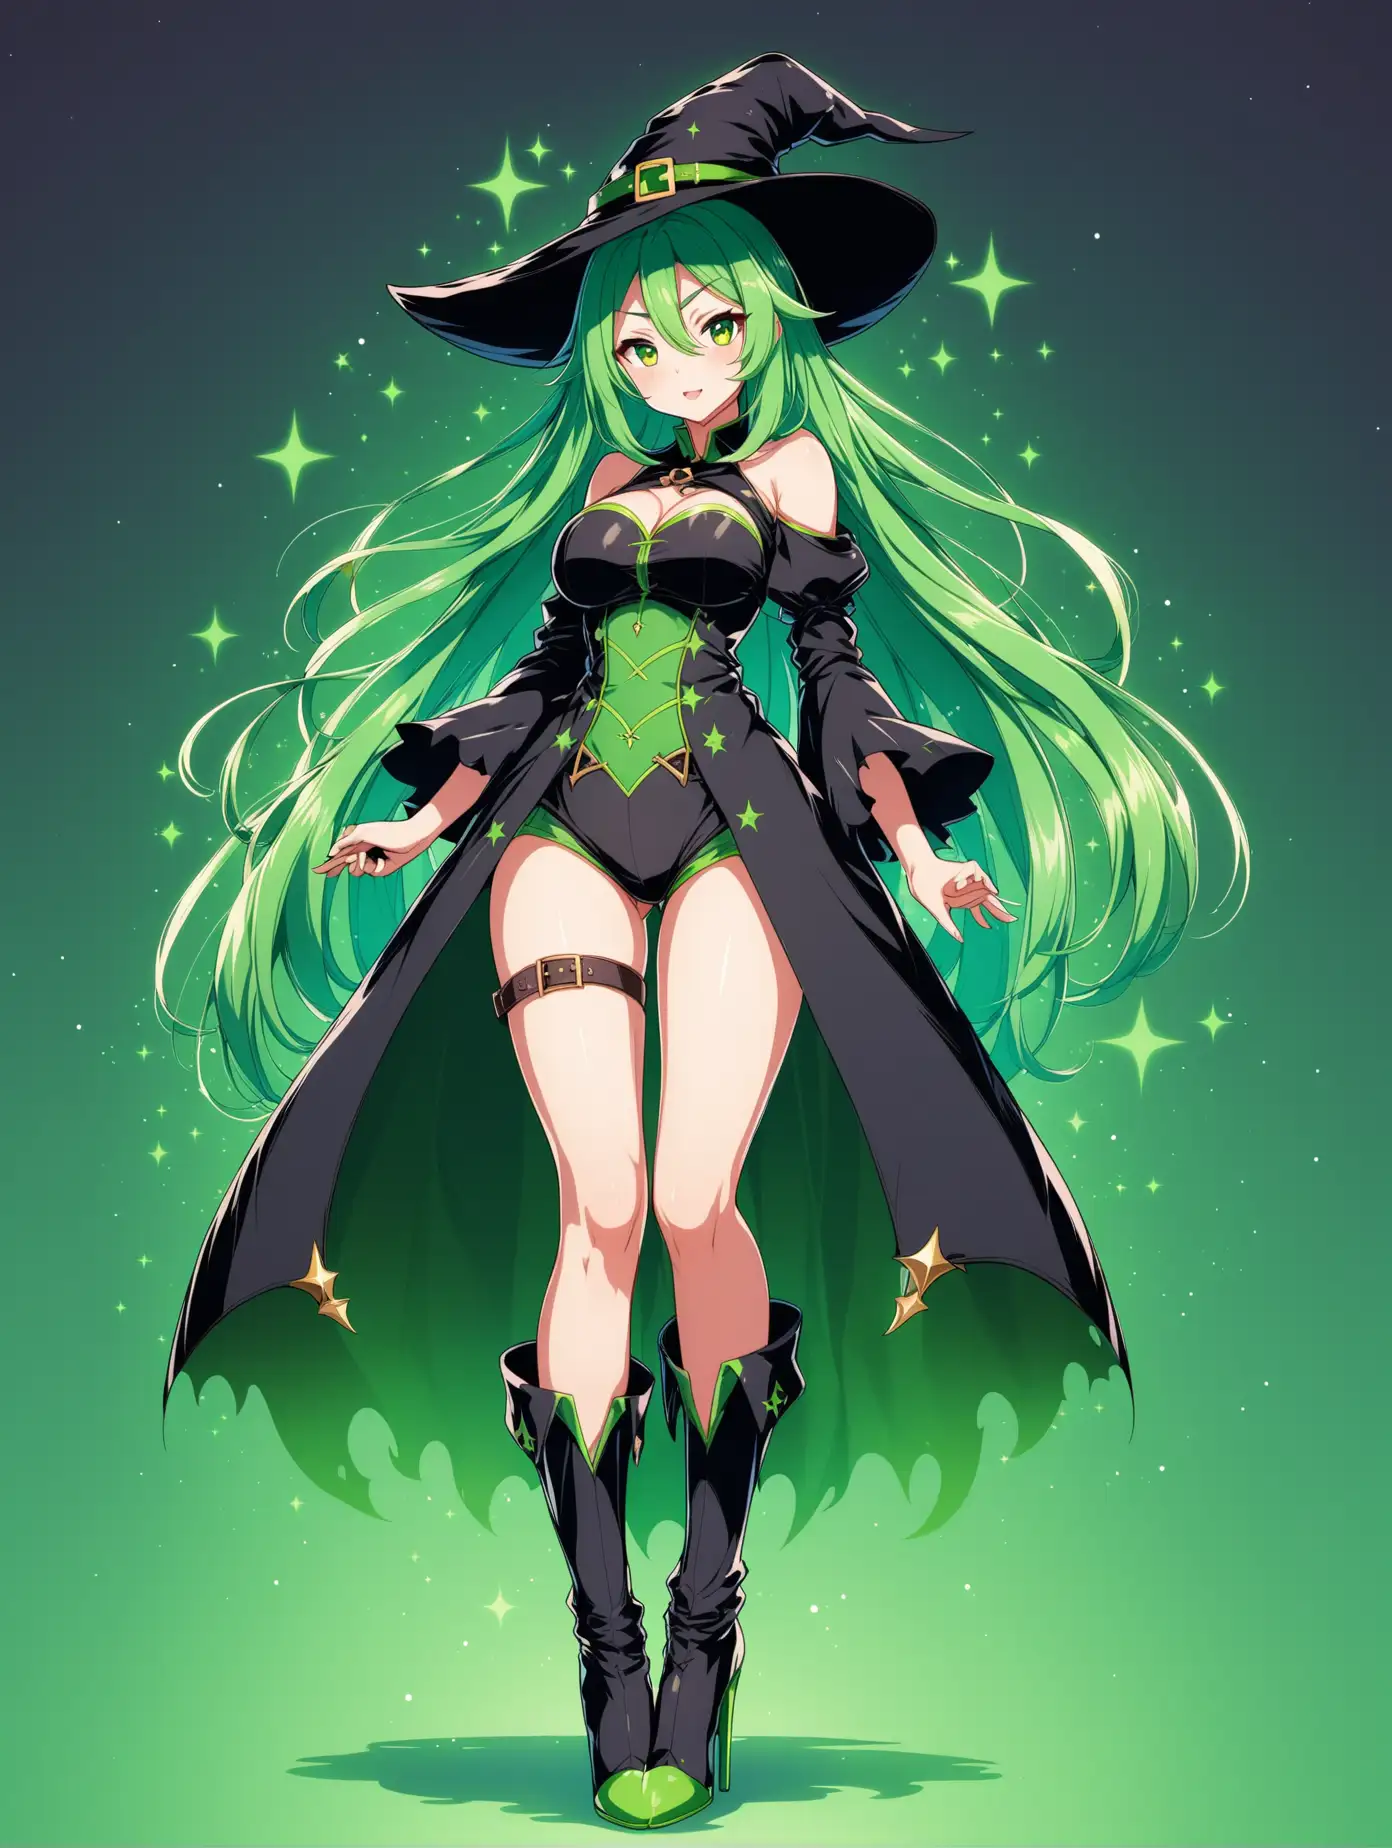 Full body image of a hot anime witch girl with green hair wearing high heels boots